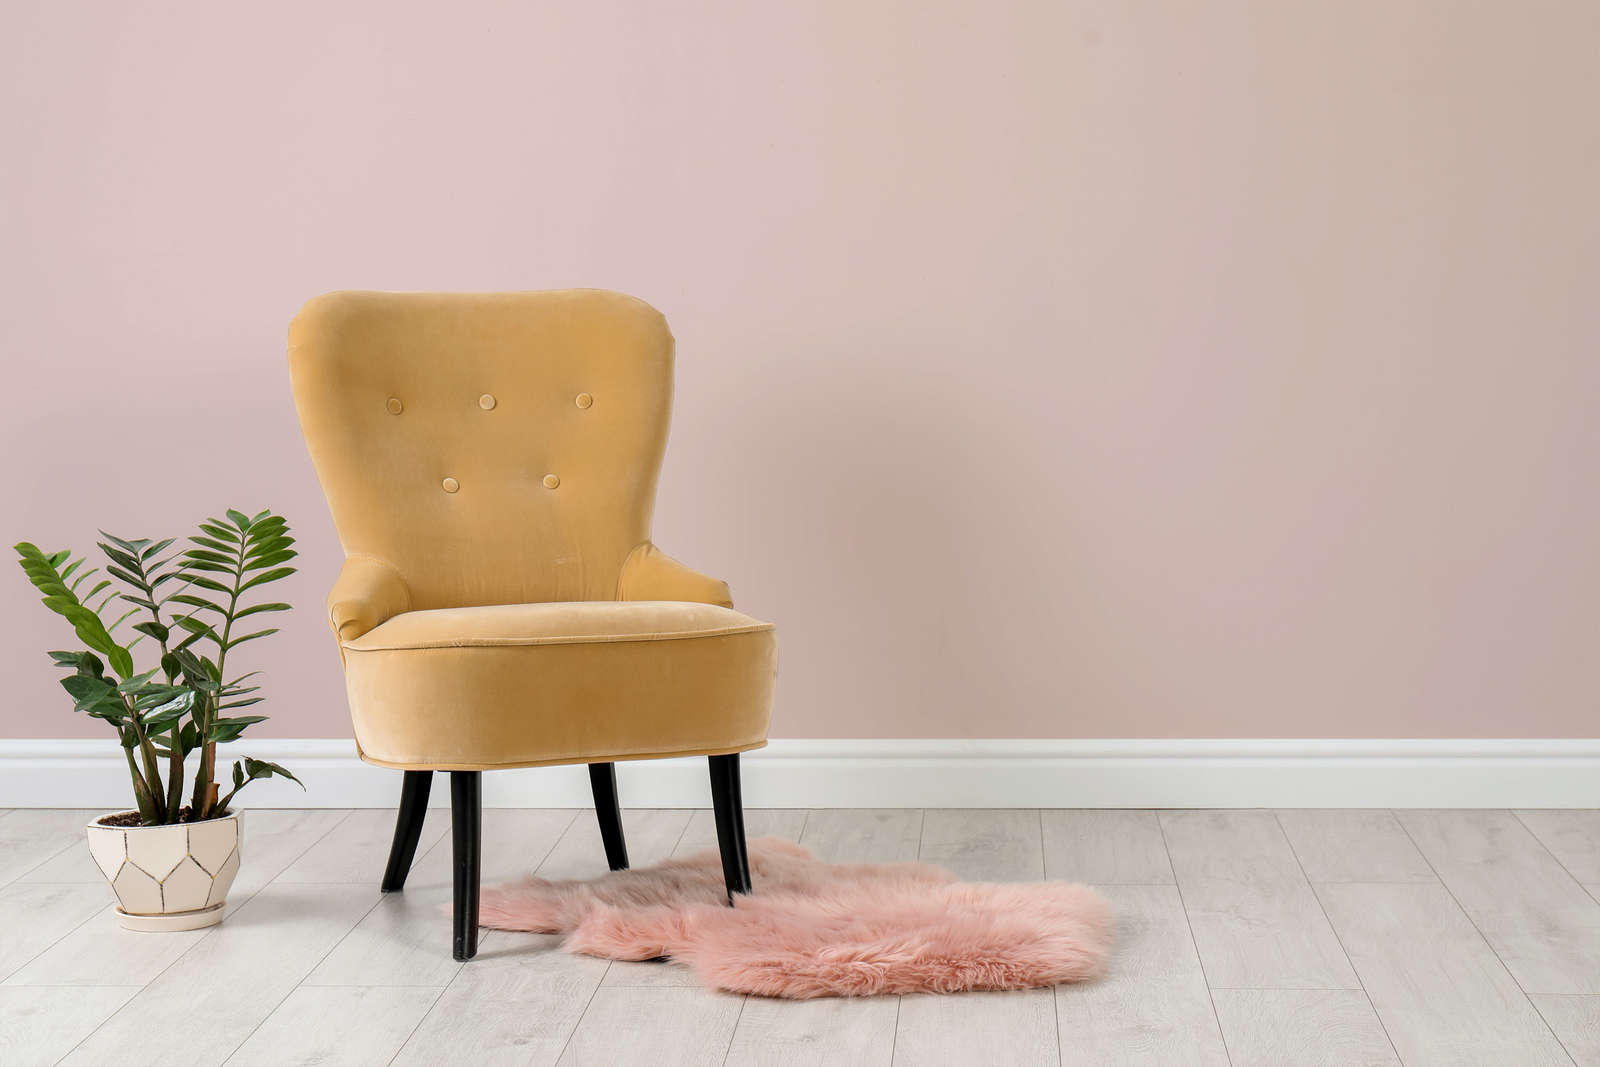             Wall Paint TCK7007 »Sweet Strawberry» an interplay of pink and beige – 2.5 litre
        